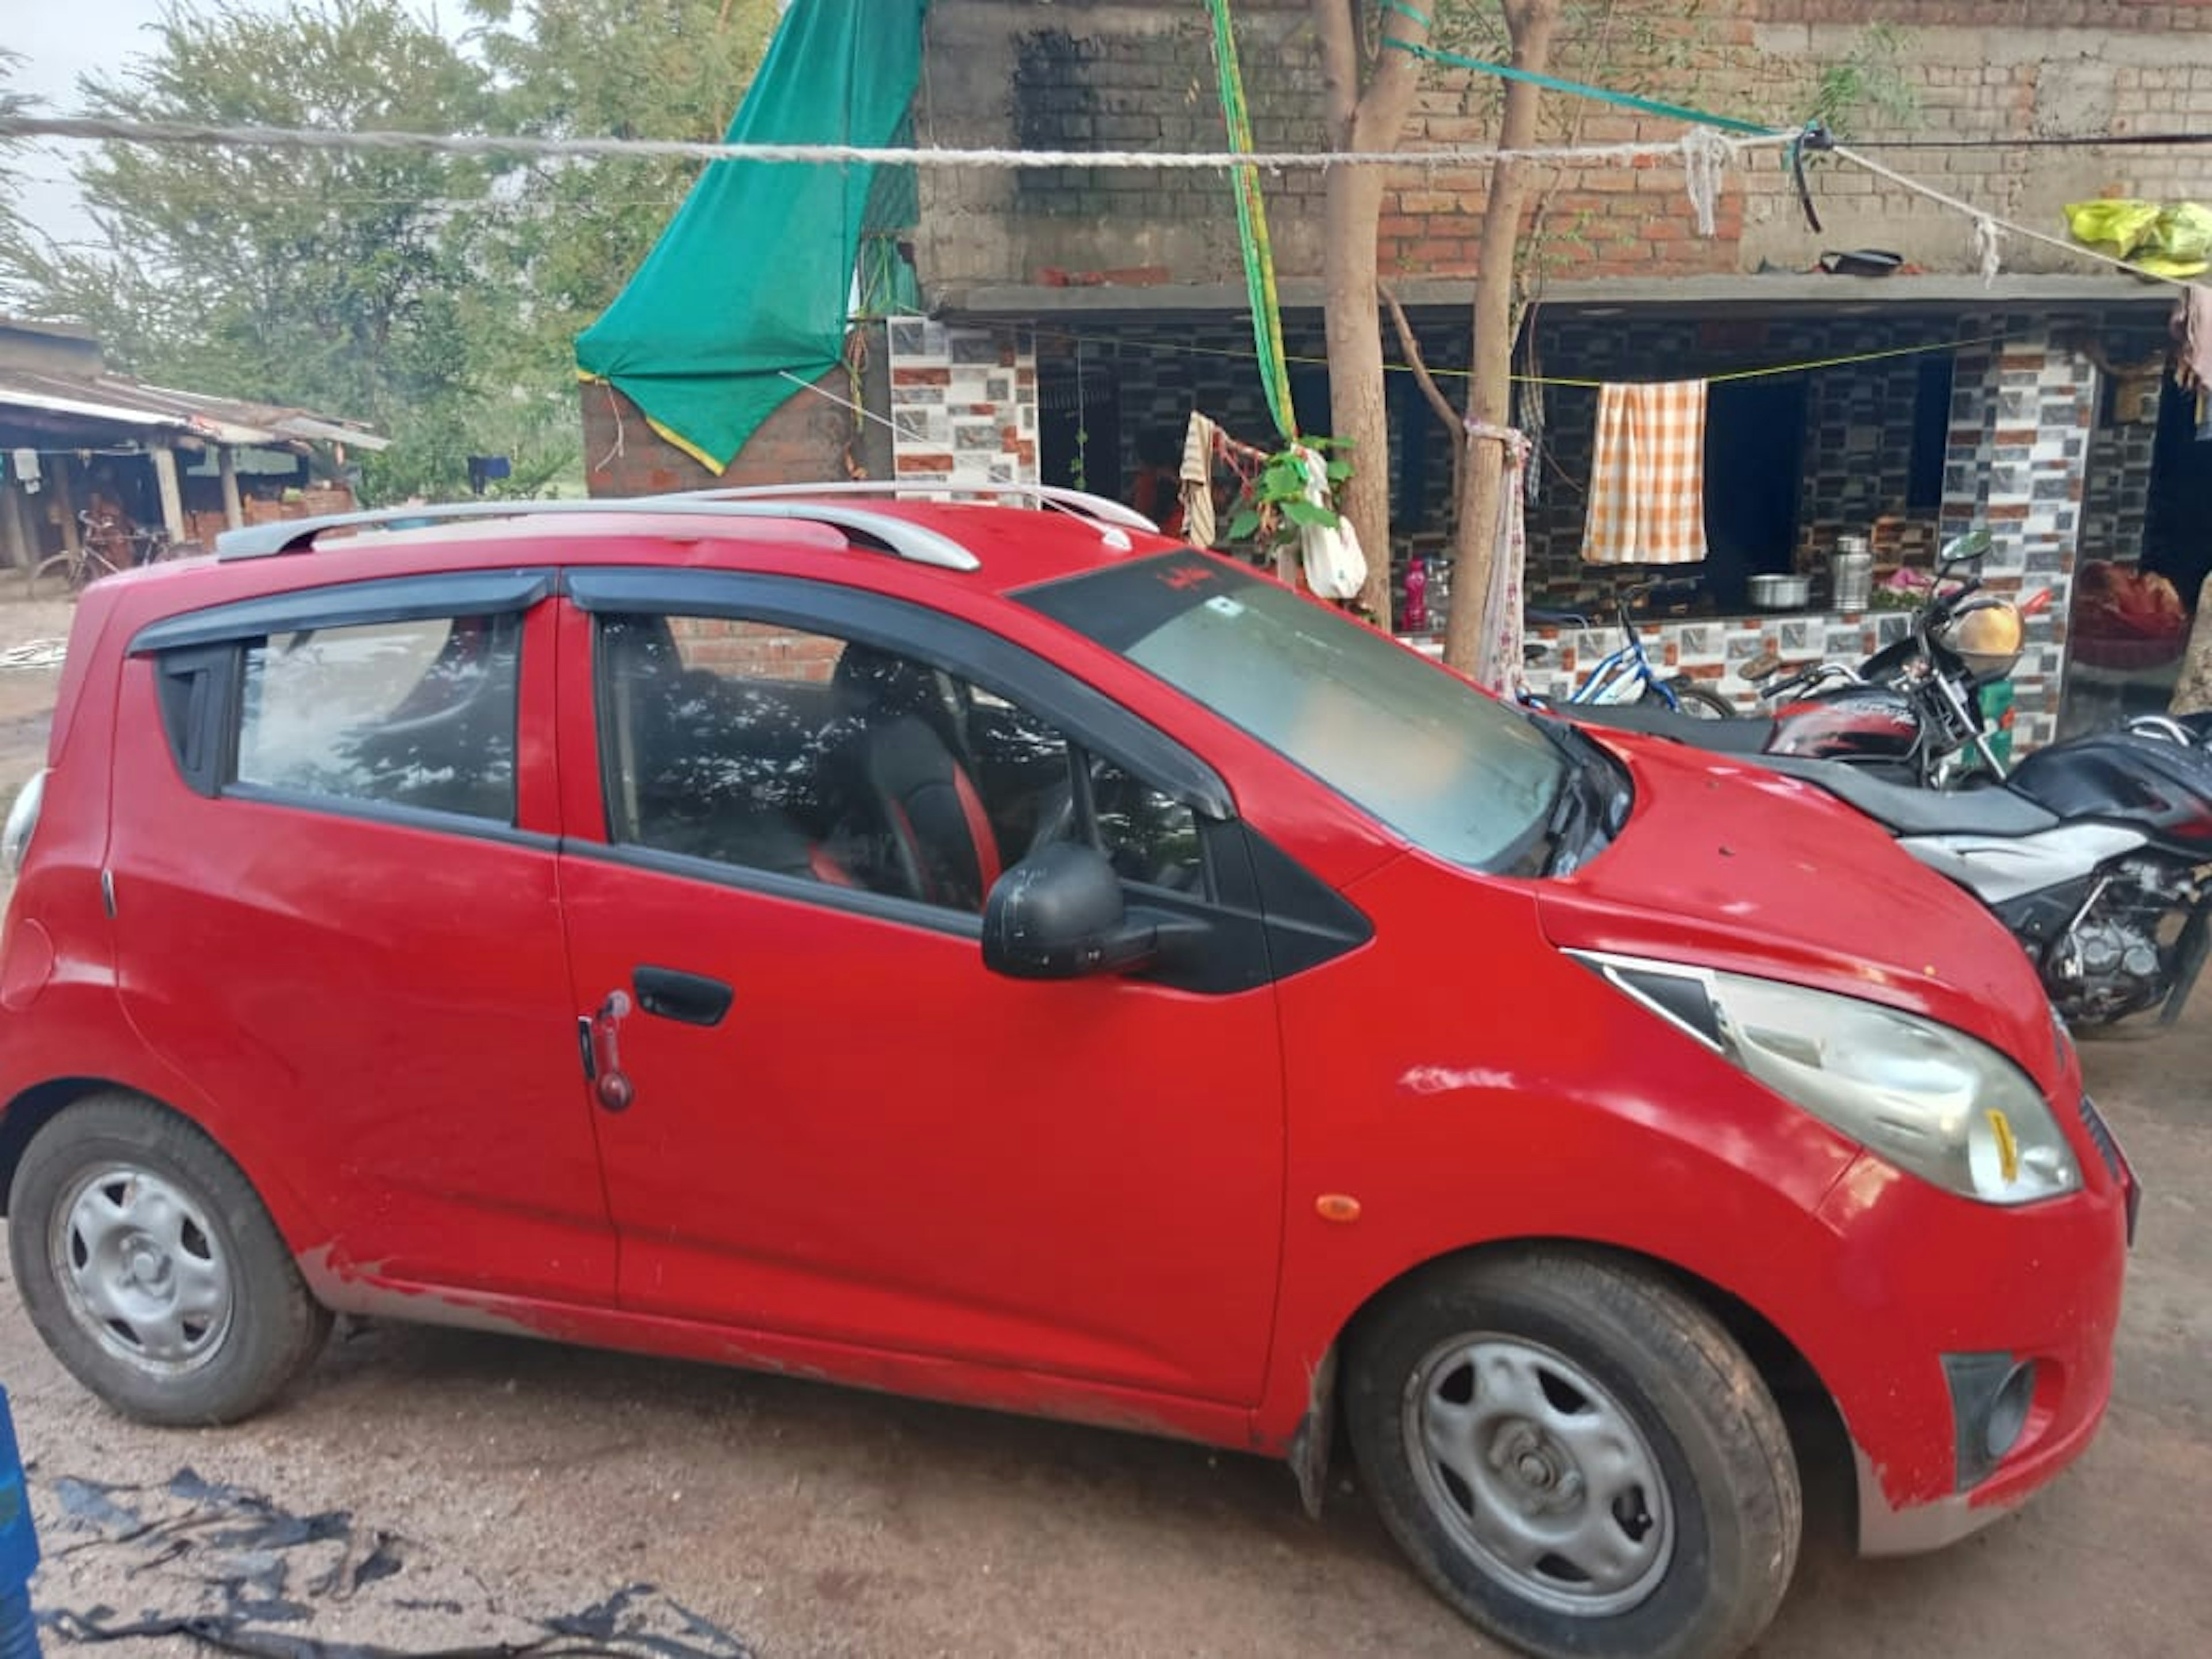 View - Chevrolet beat photos, Chevrolet beat available in Ahmedabad, make deal in 130000